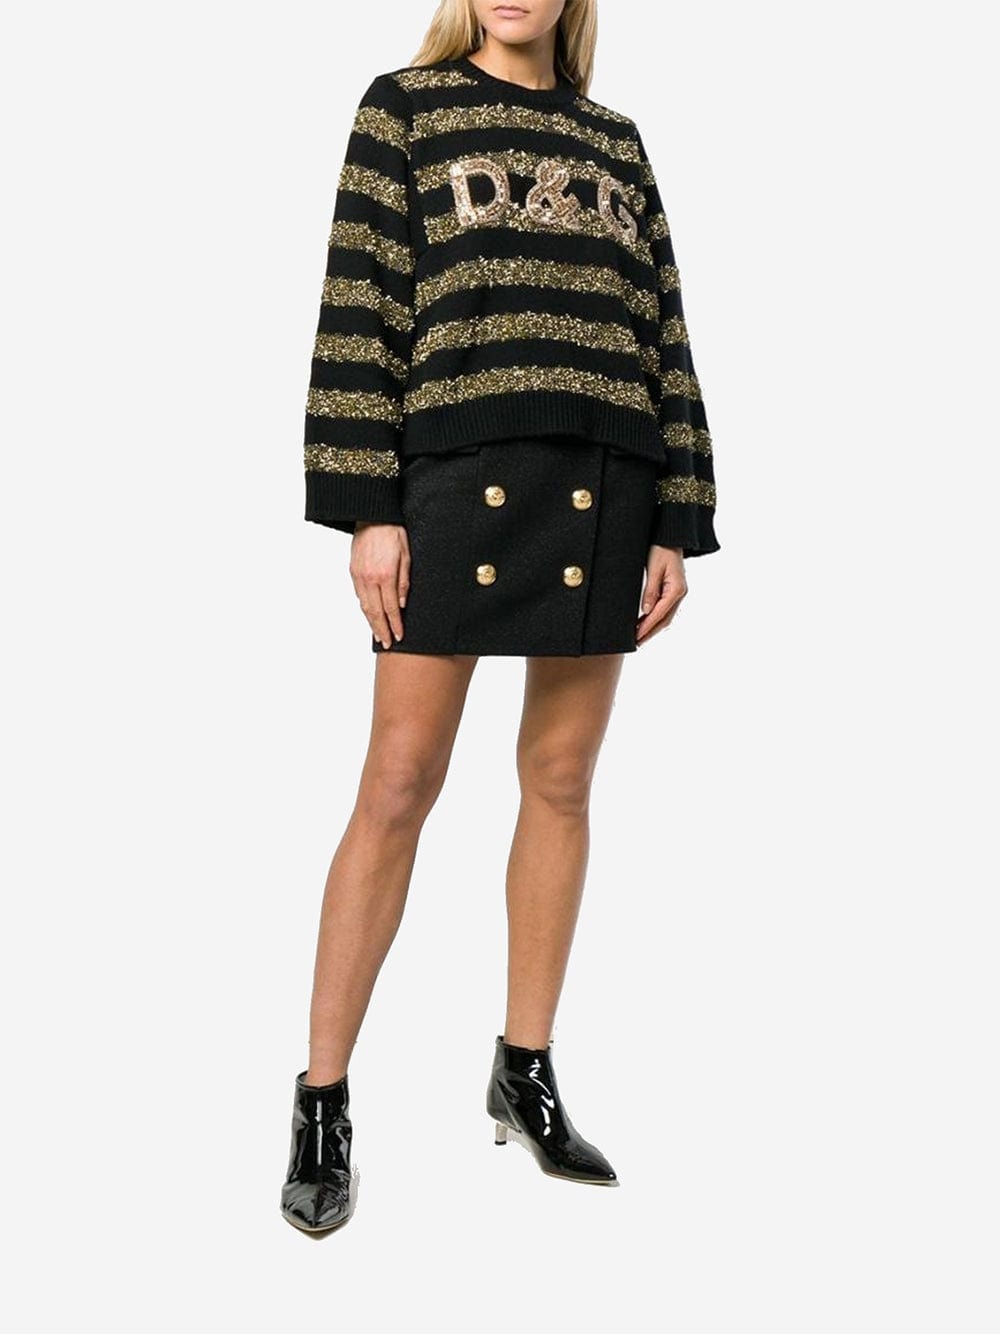 Dolce & Gabbana Sequined Striped Knit Sweater